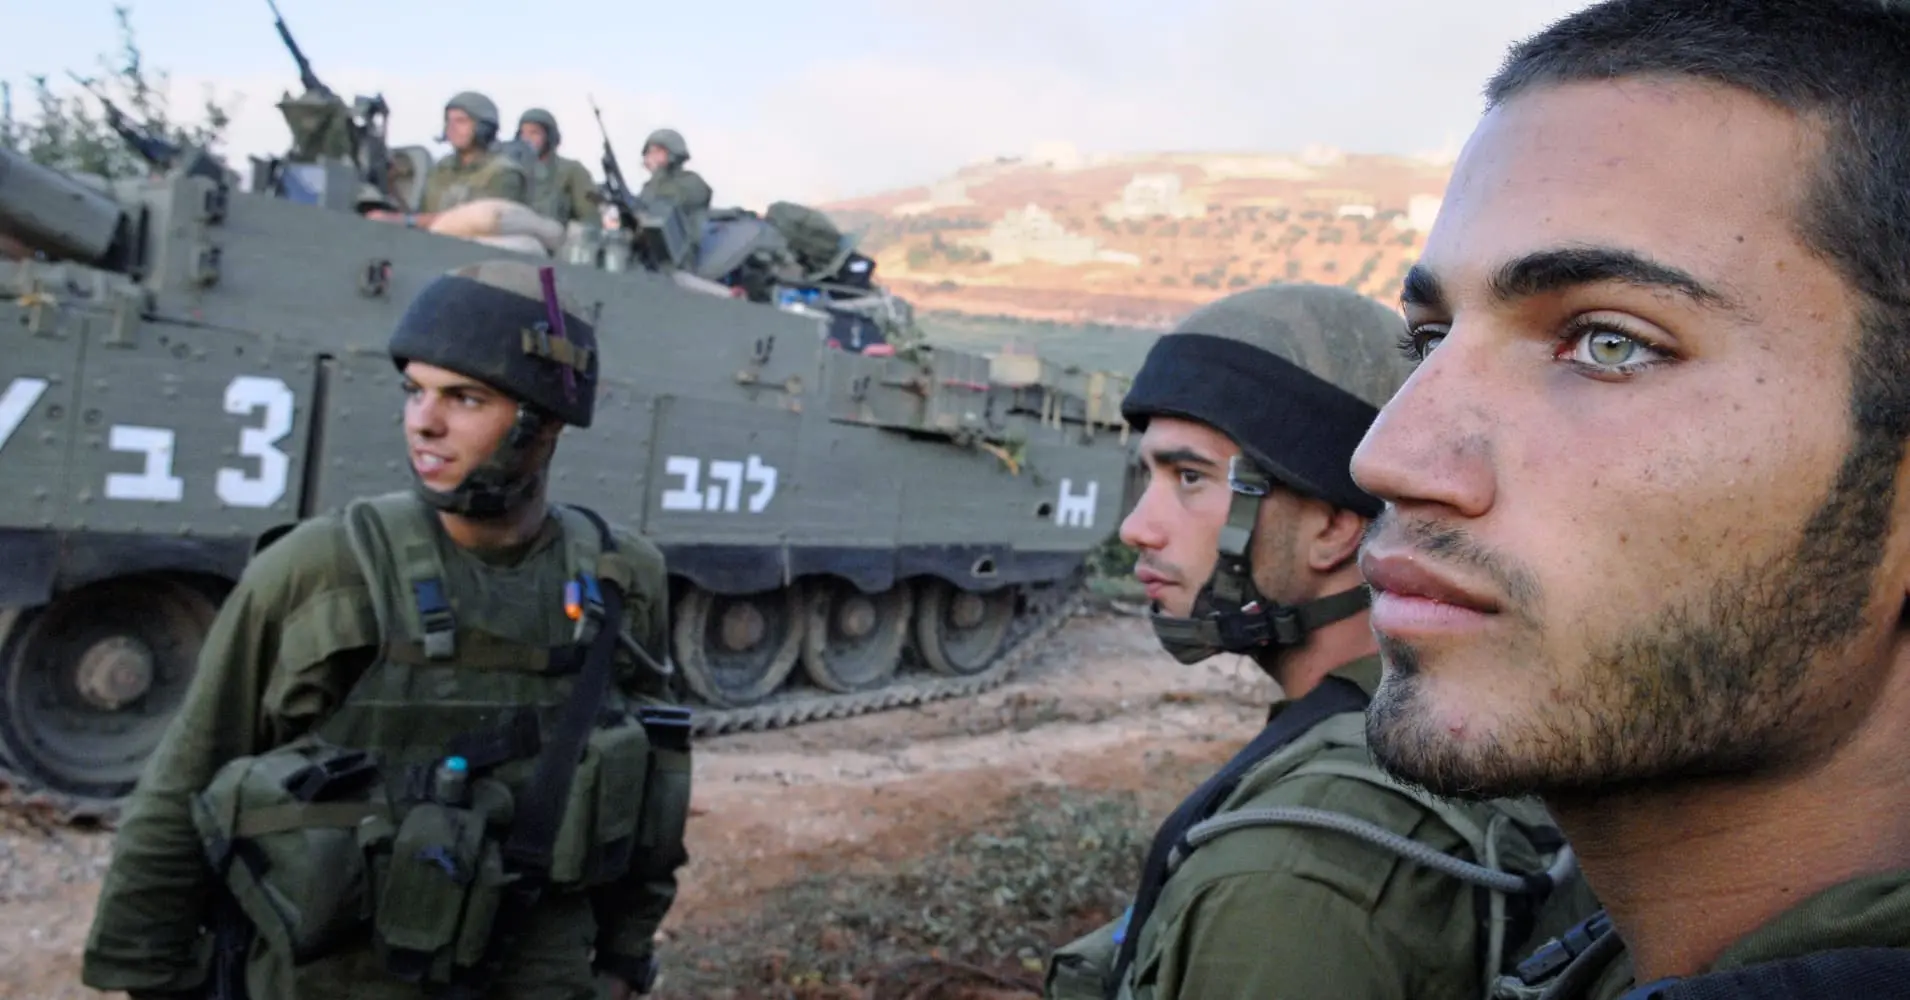 U.S. and Germany: Steadfast Allies to Israel's Defense Forces. (Photo Internet reproduction)